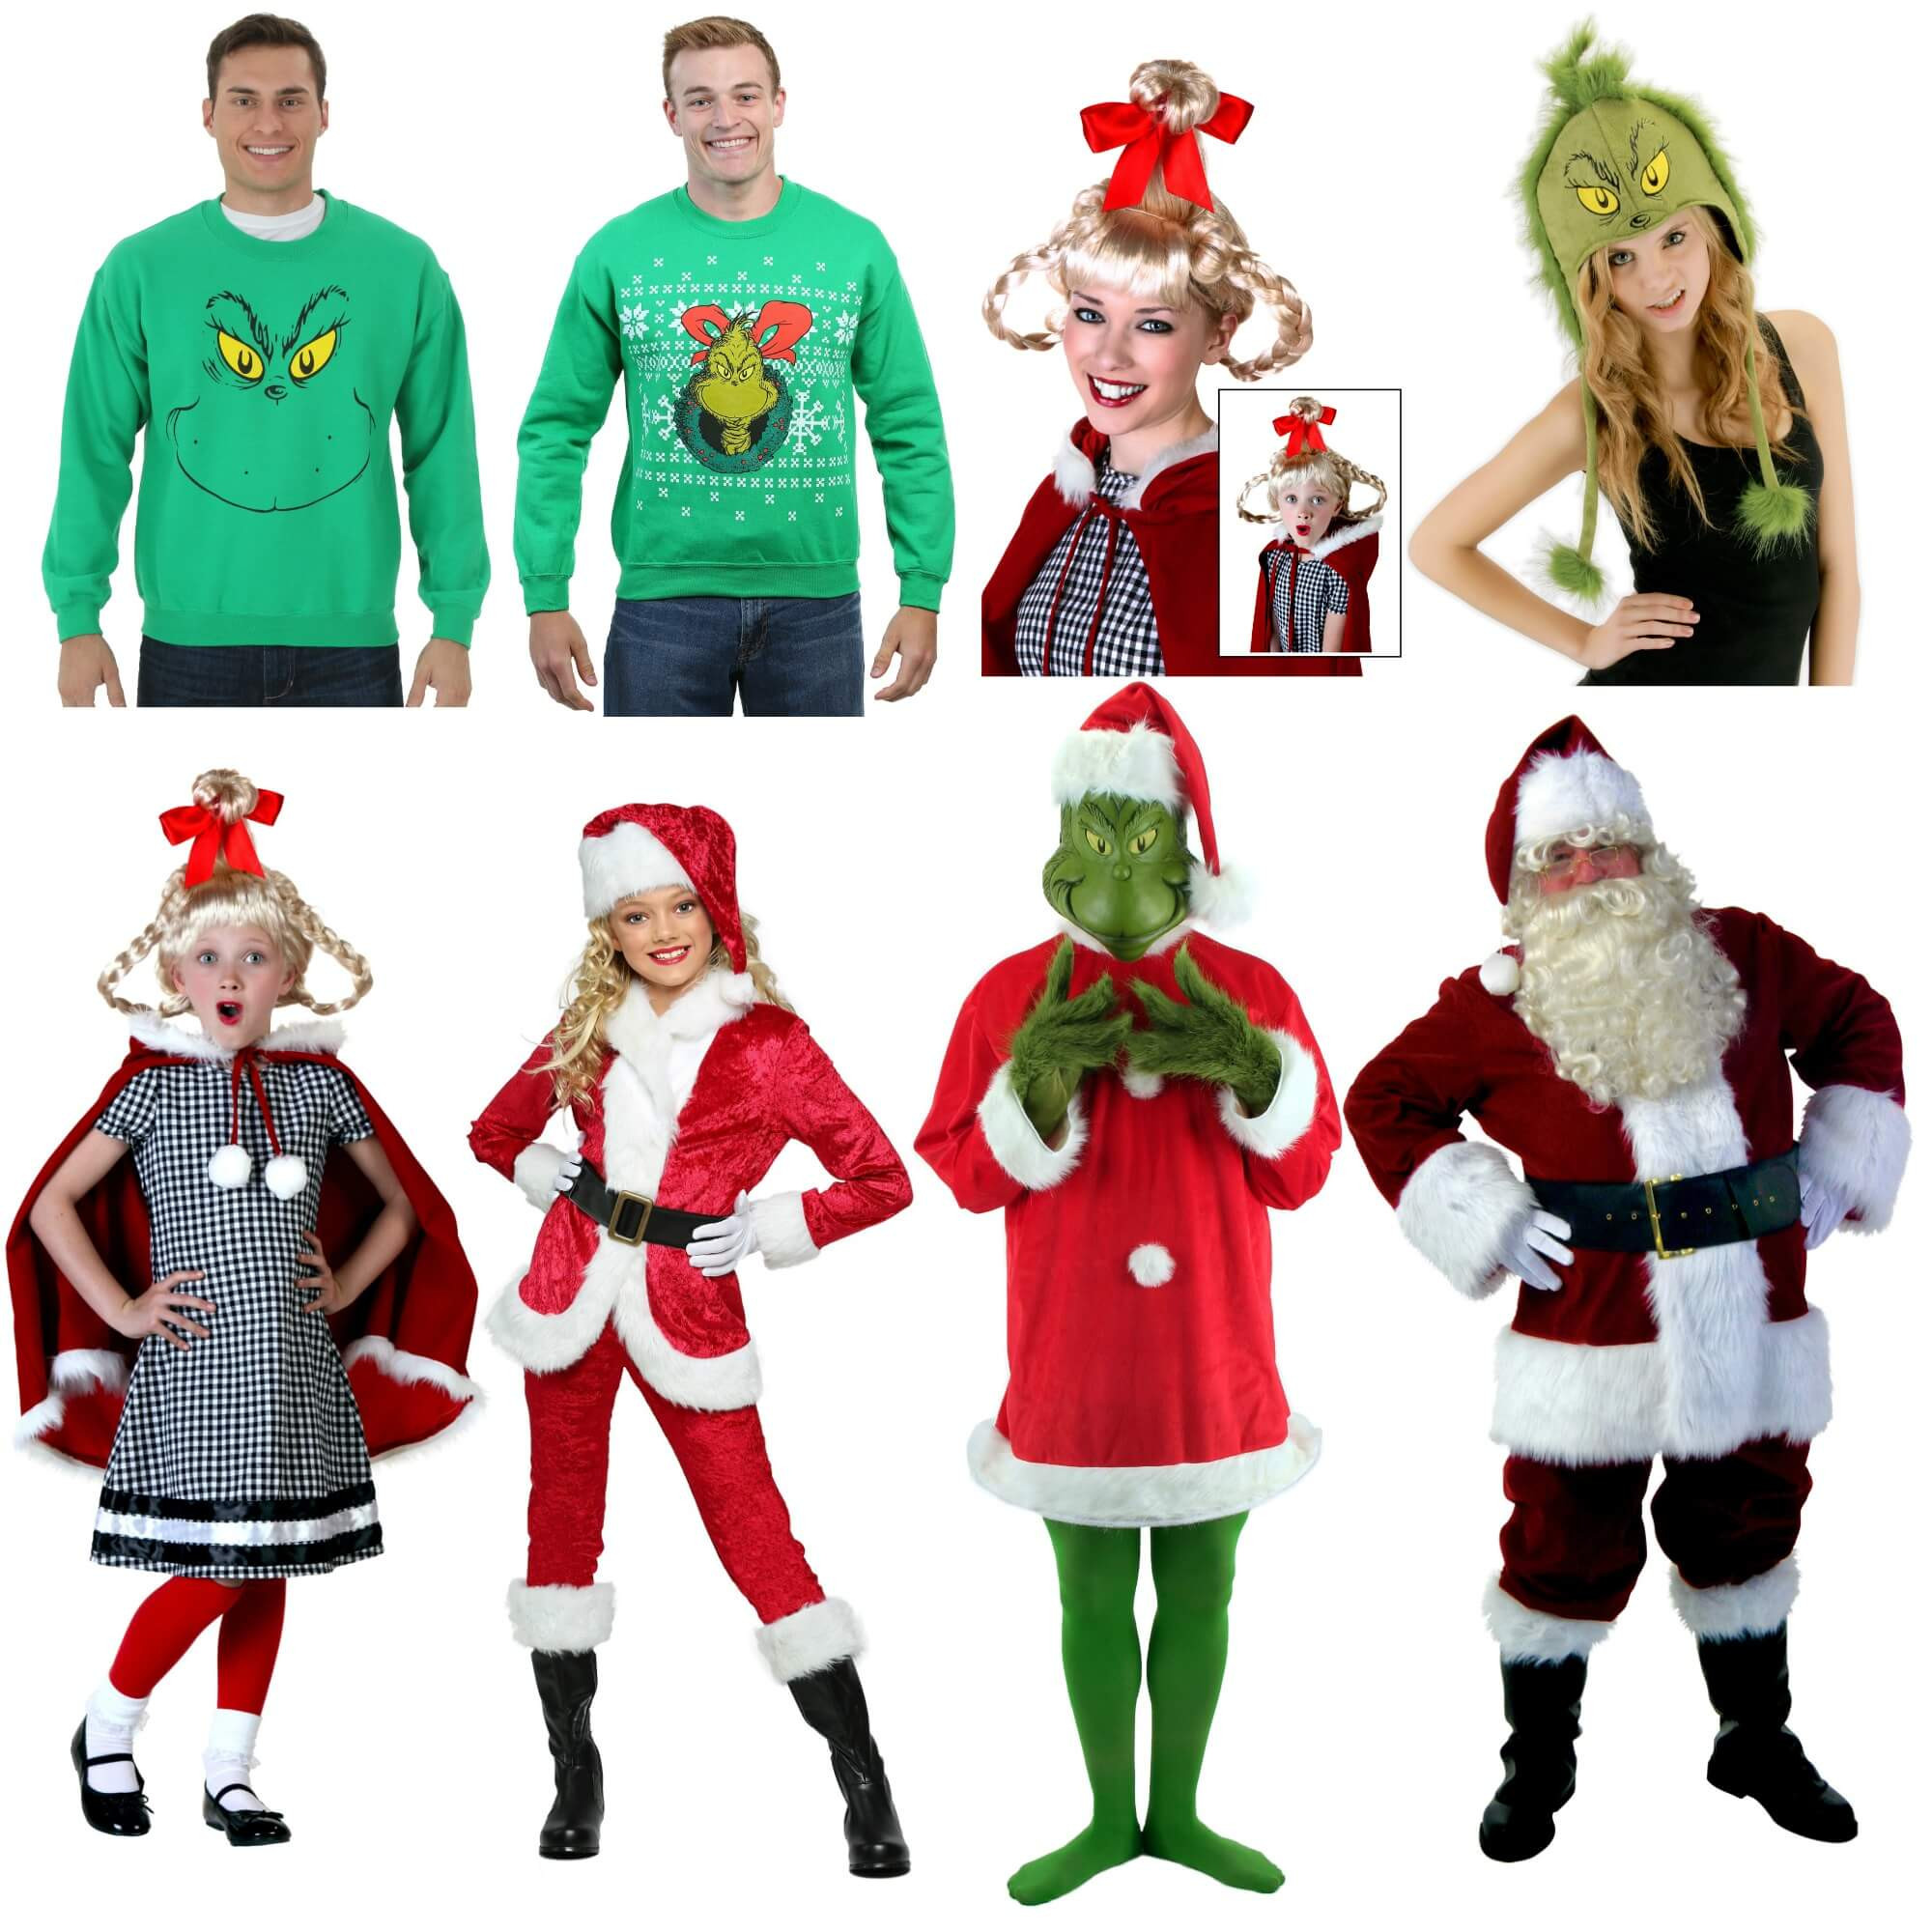 Christmas Costume Party Ideas
 How to Throw a Grinch Costume Party Halloween Costumes Blog